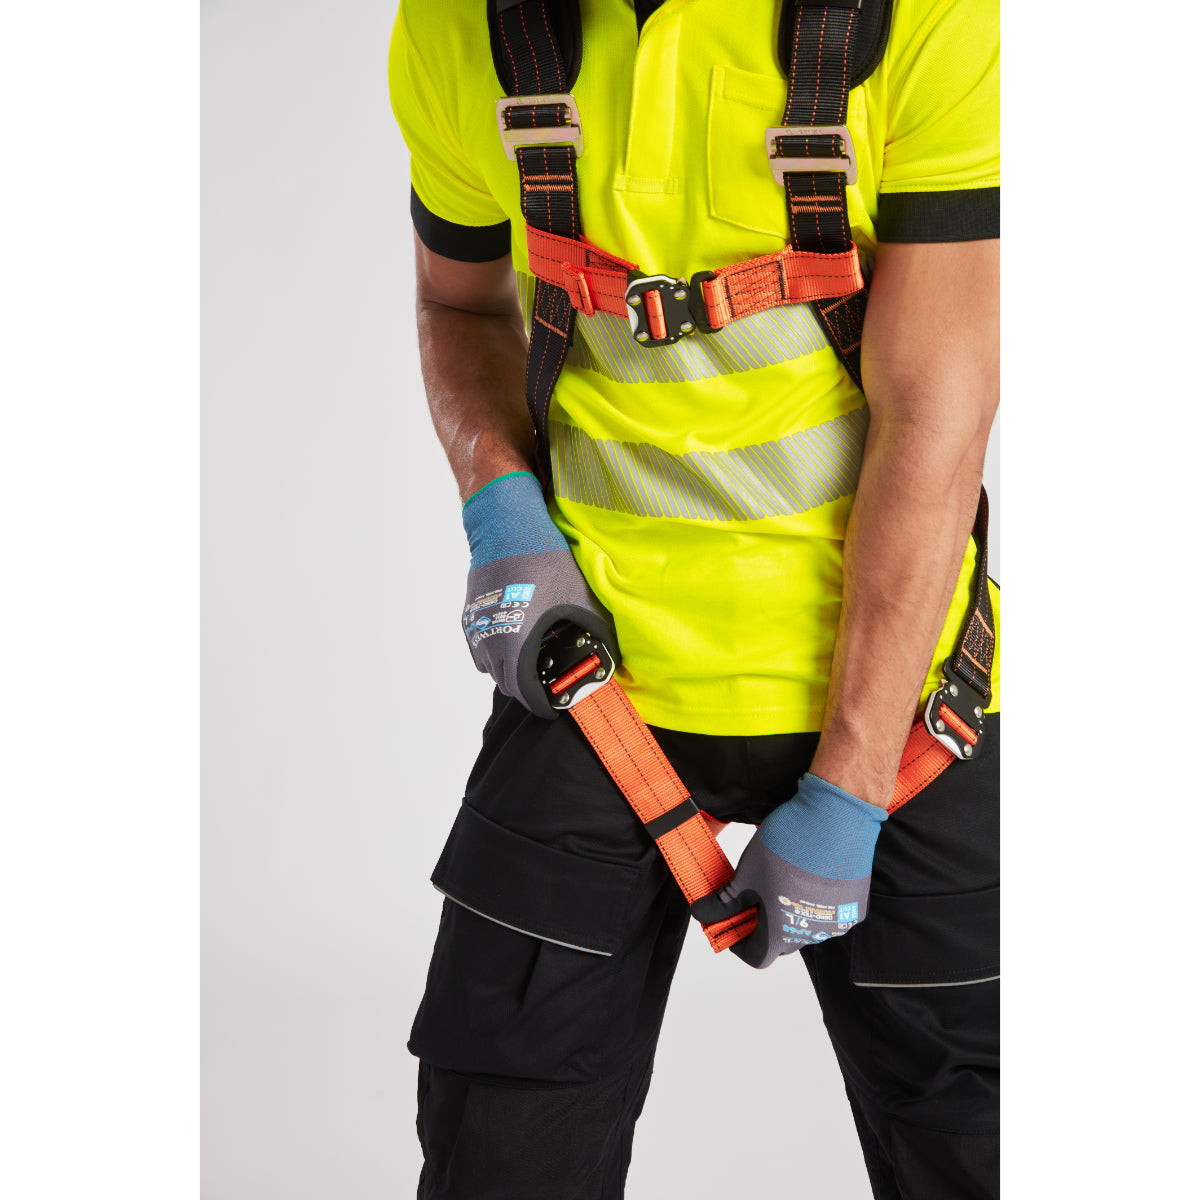 Portwest Portwest Ultra 1 Point Harness